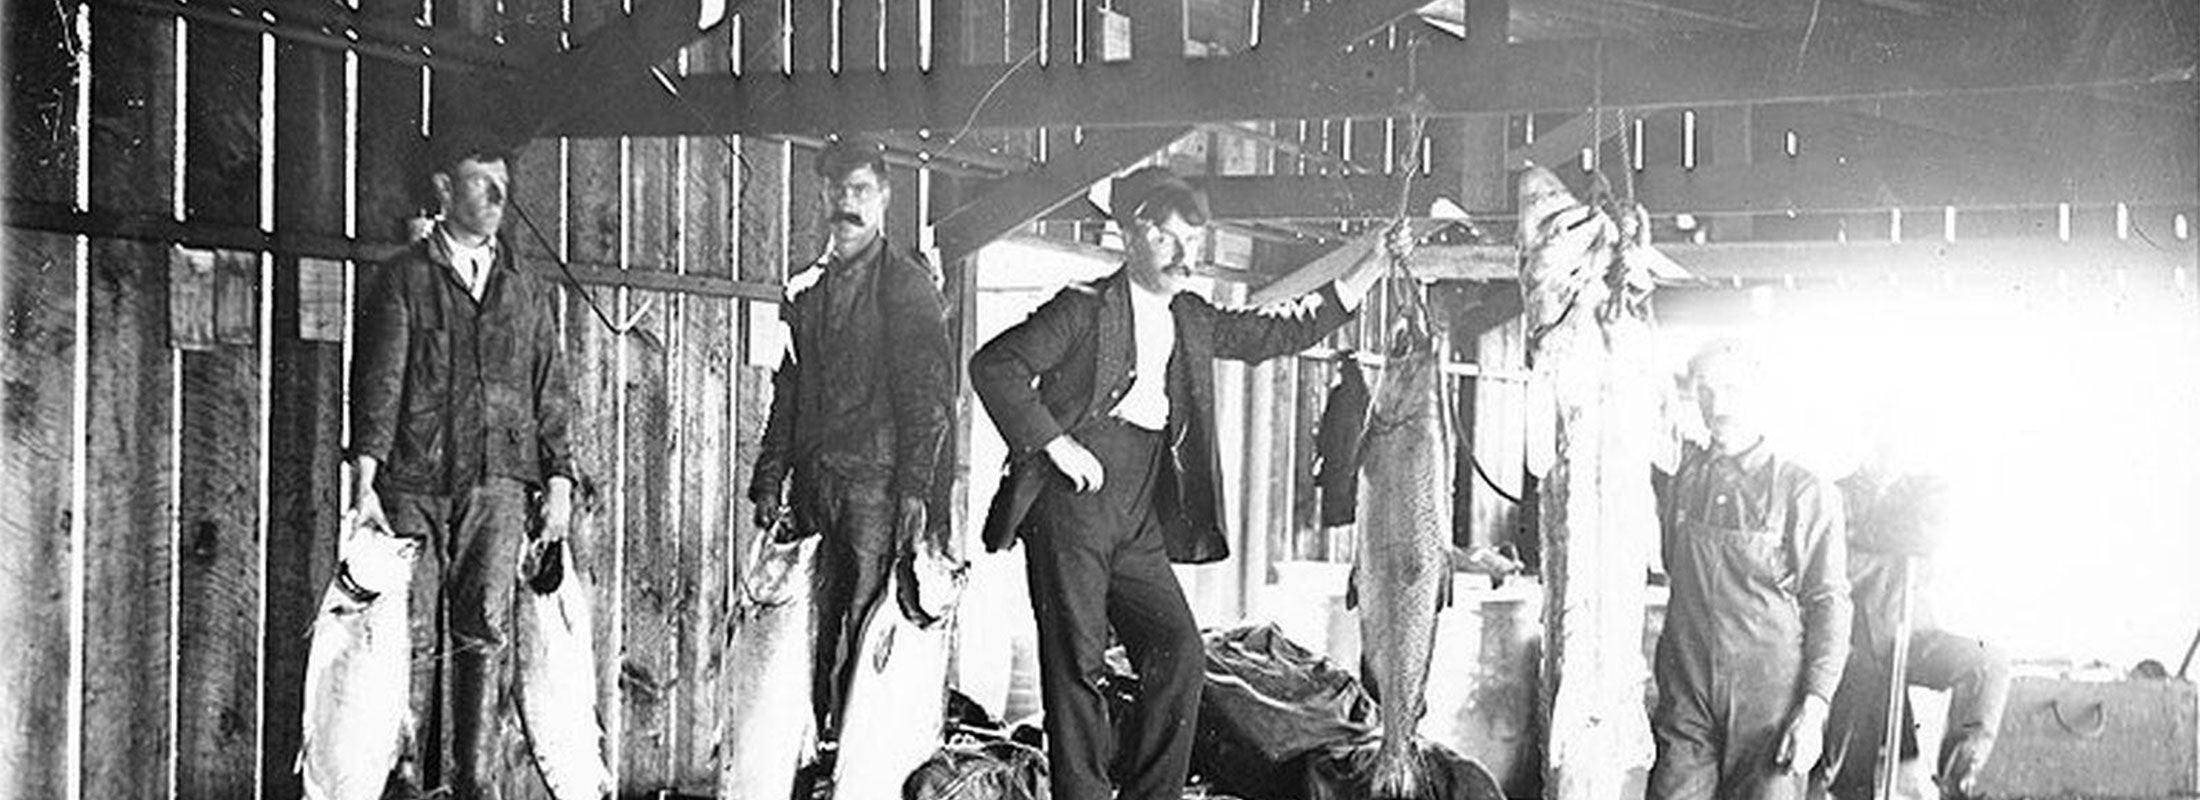 A 1906 black and white photograph of large salmon and men in suits in a Puget Sound salmon cannery